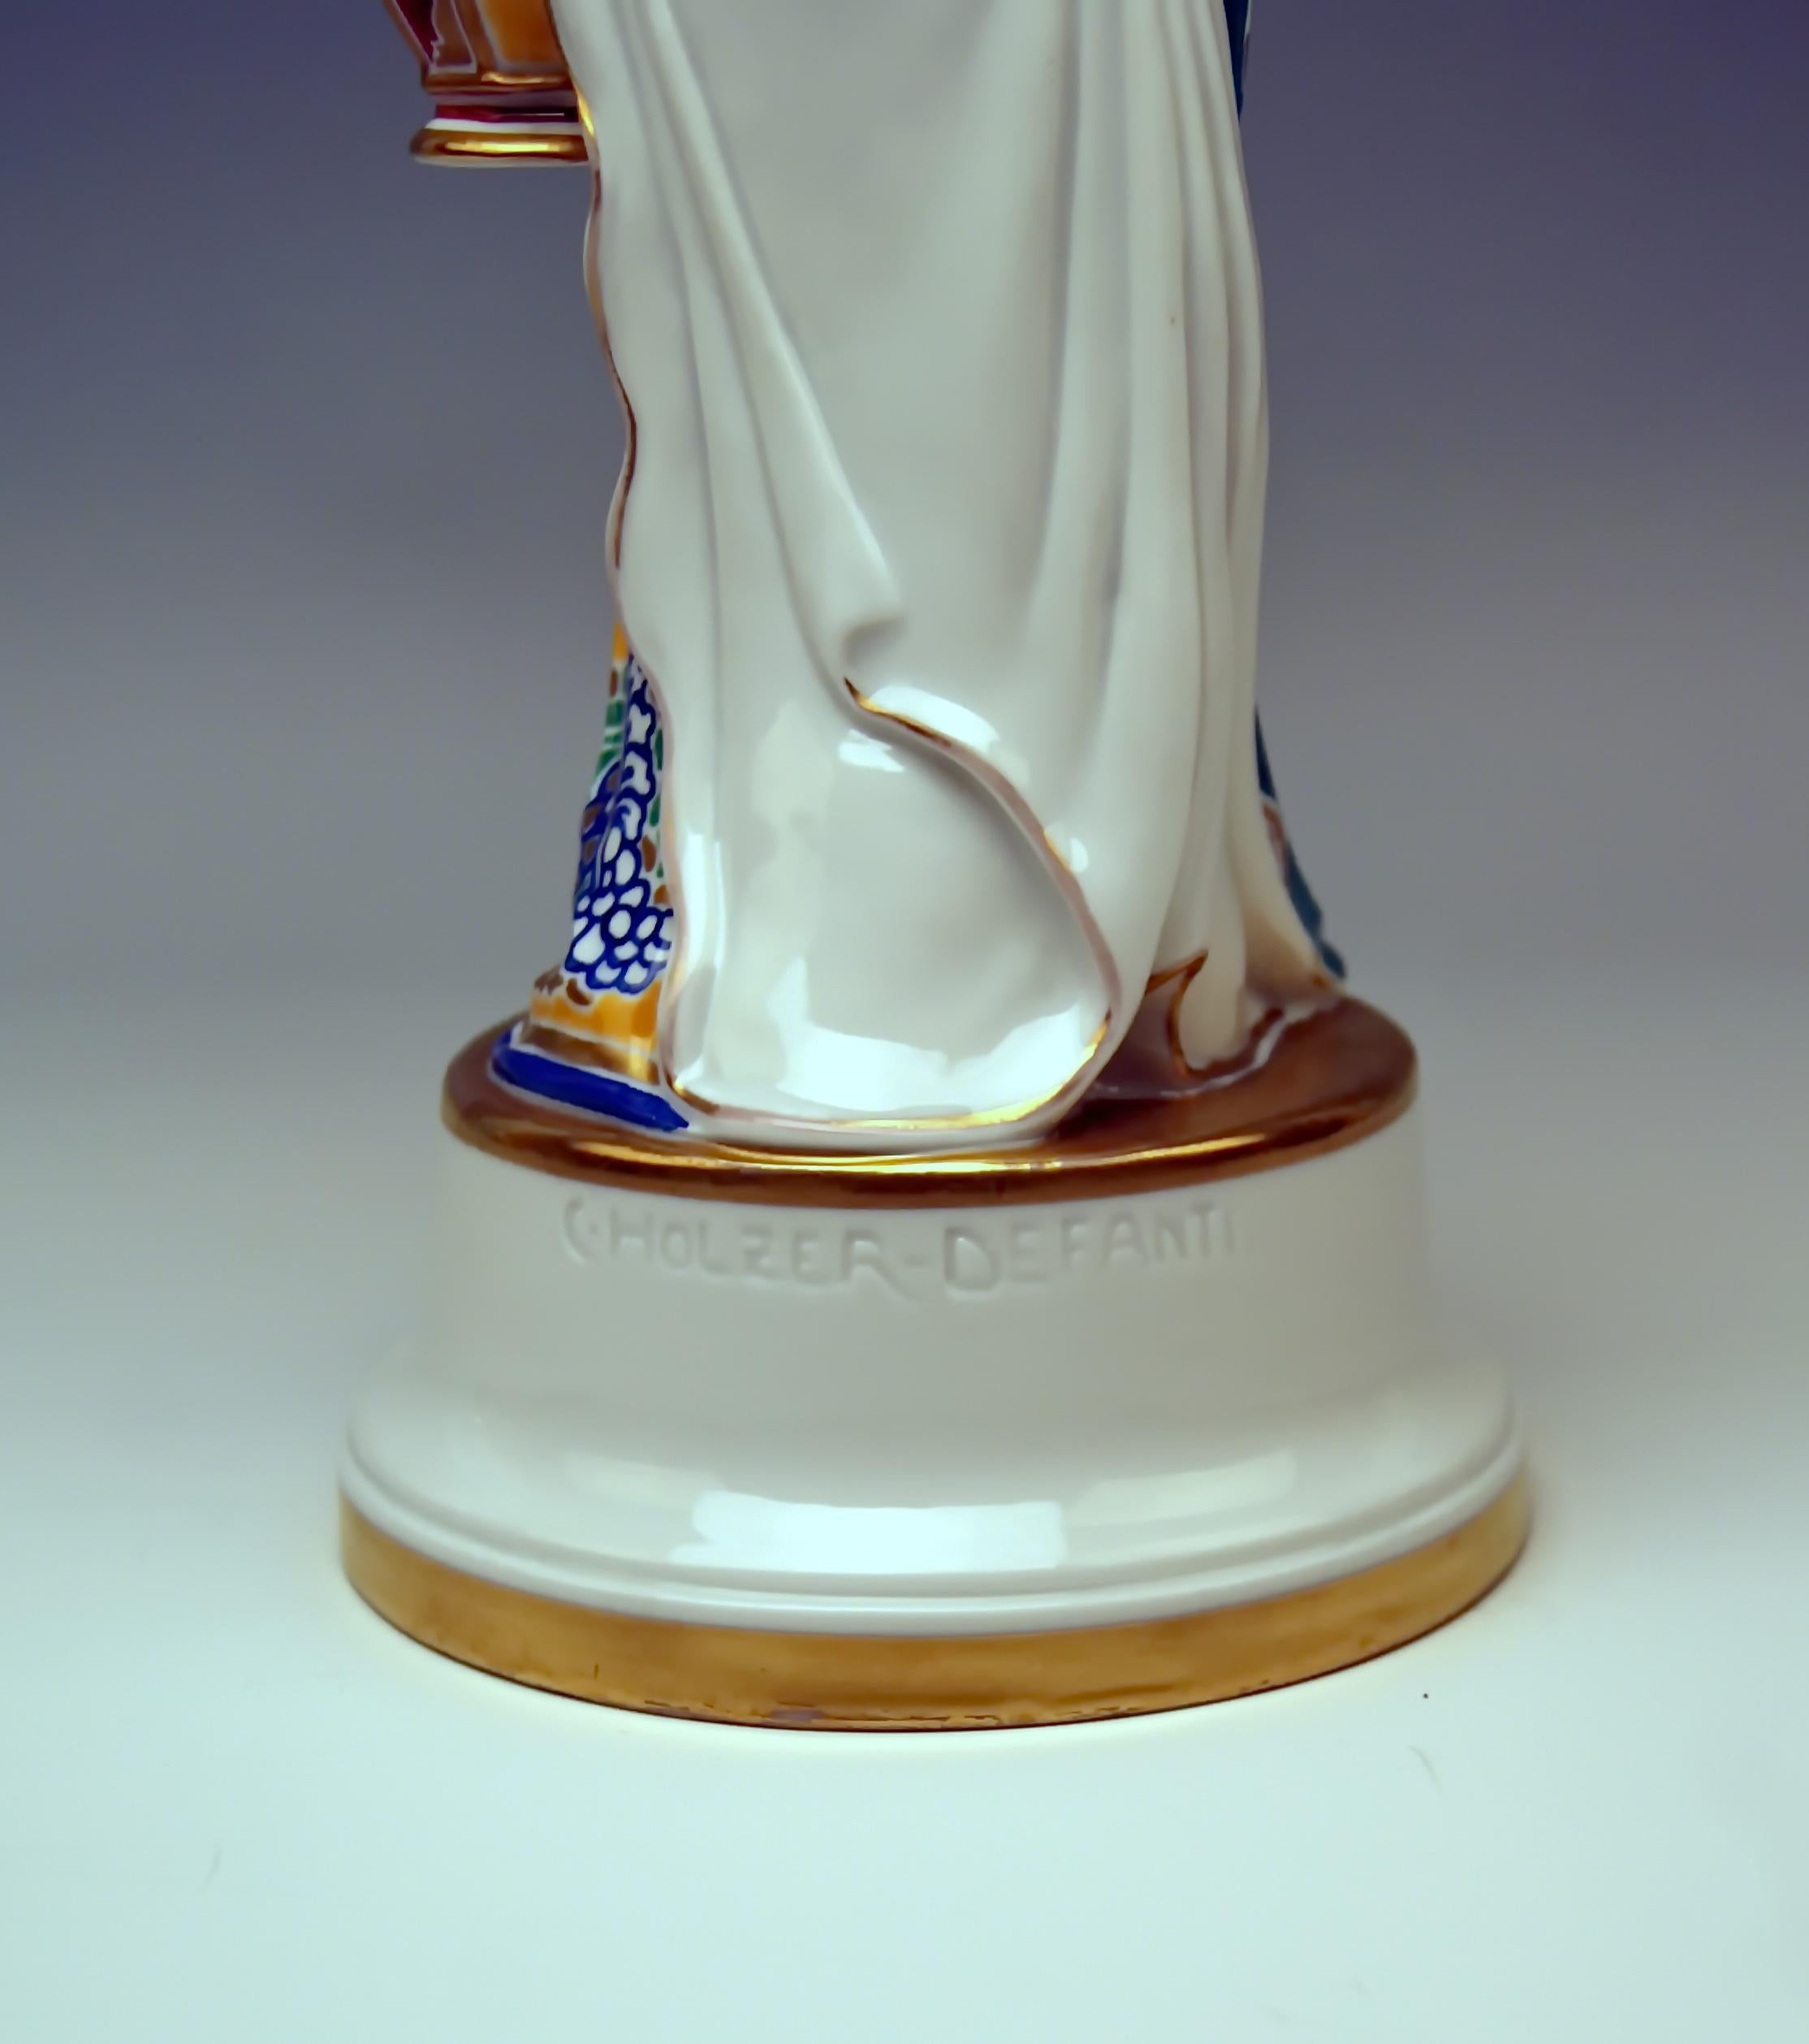 Porcelain Rosenthal Germany Chinese Lady Dancer Chaokium Constantin Holzer-Defanti, 1920